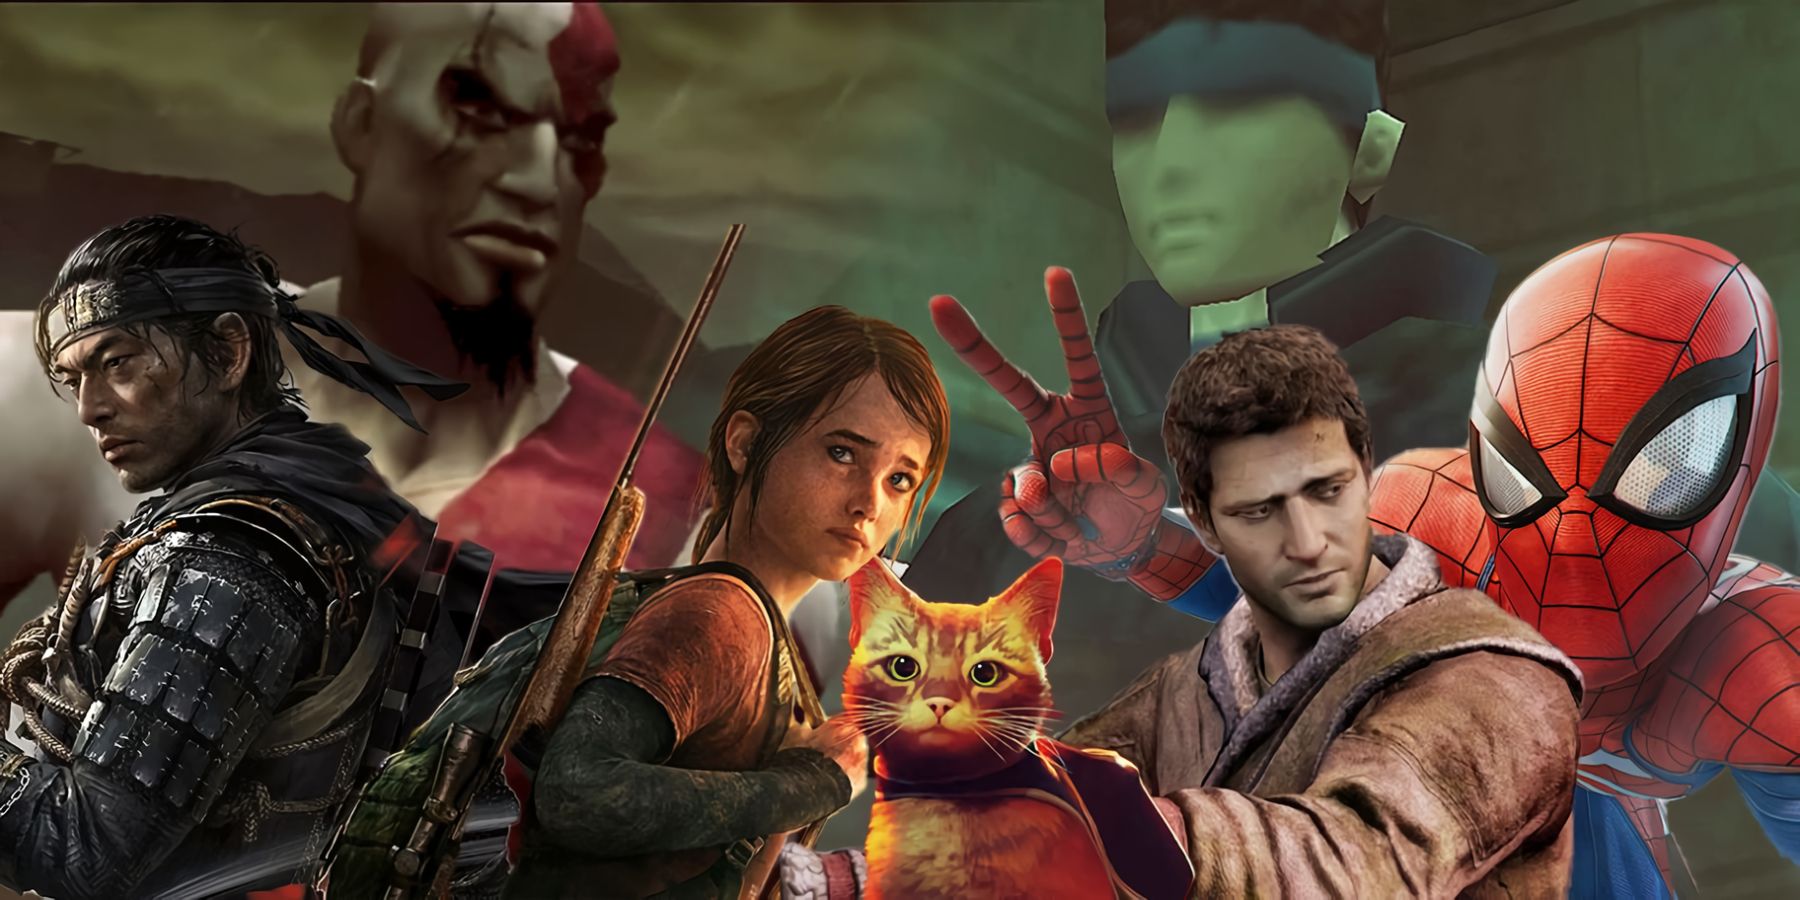 A collage of PlayStation exclusive characters - Kratos and Snake in the background, with Jin, Ellie, the cat from Stray, Nathan Drake, and Spider-Man in the foreground.